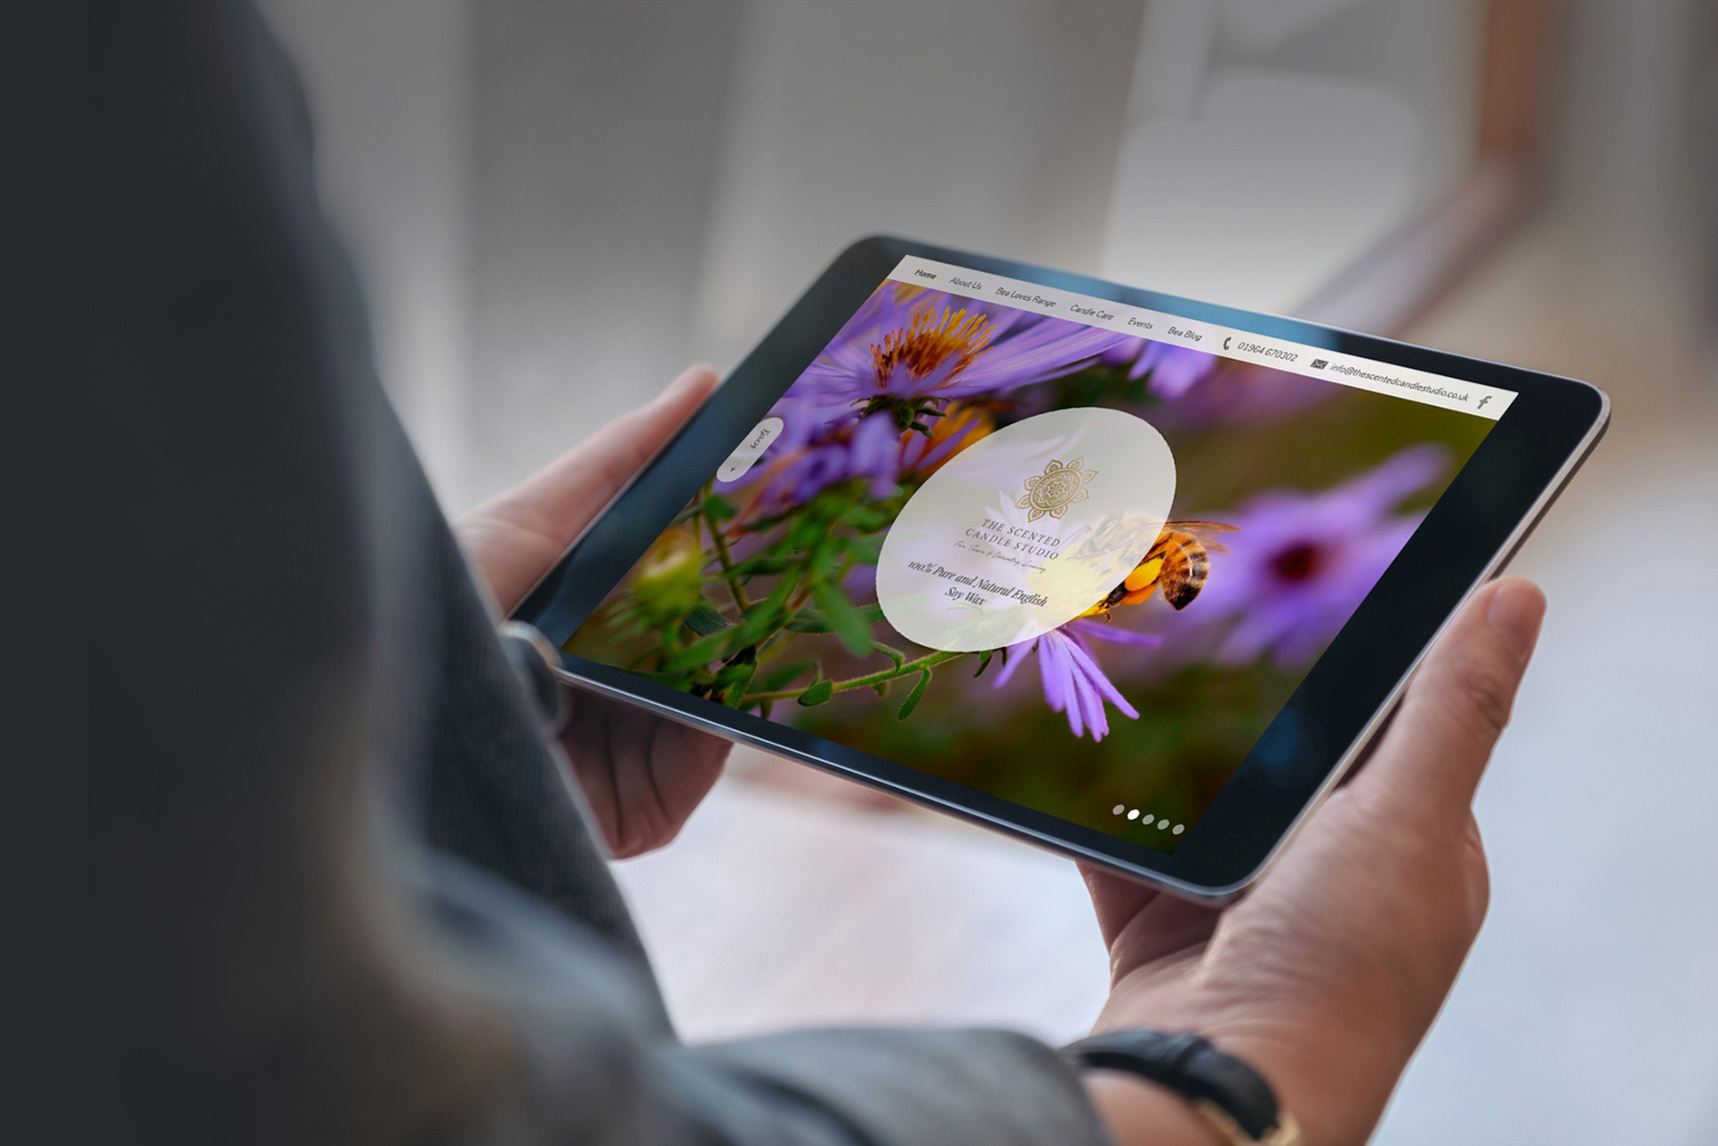 A website design shown on a tablet device